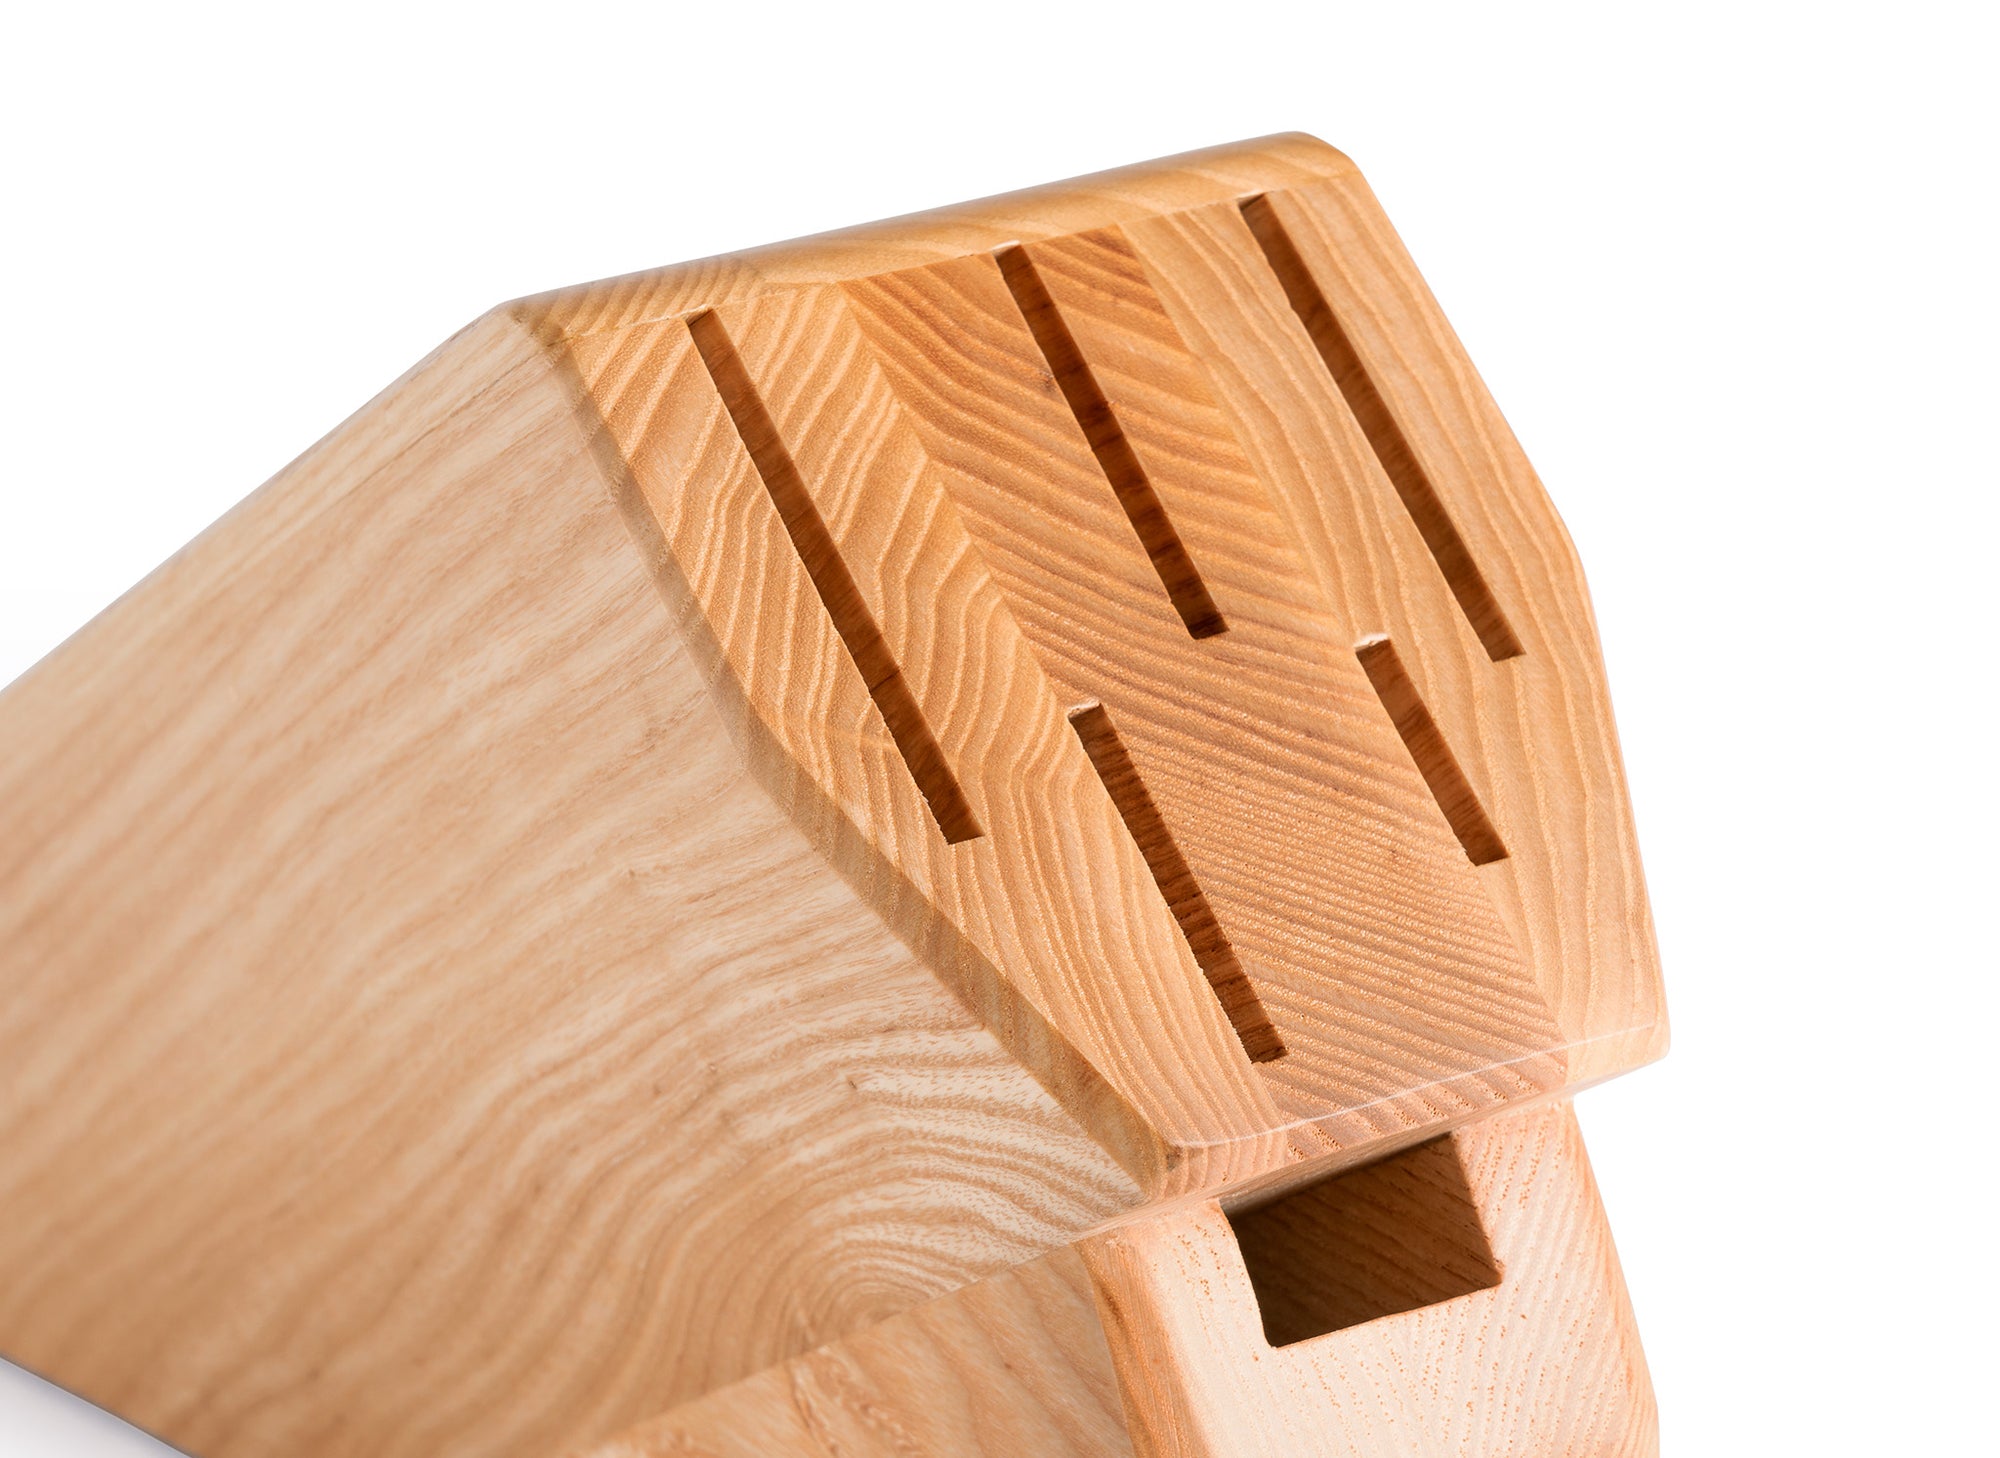 Close view of empty knife and shears slots on an Ash Misen Knife Block seen from the front.